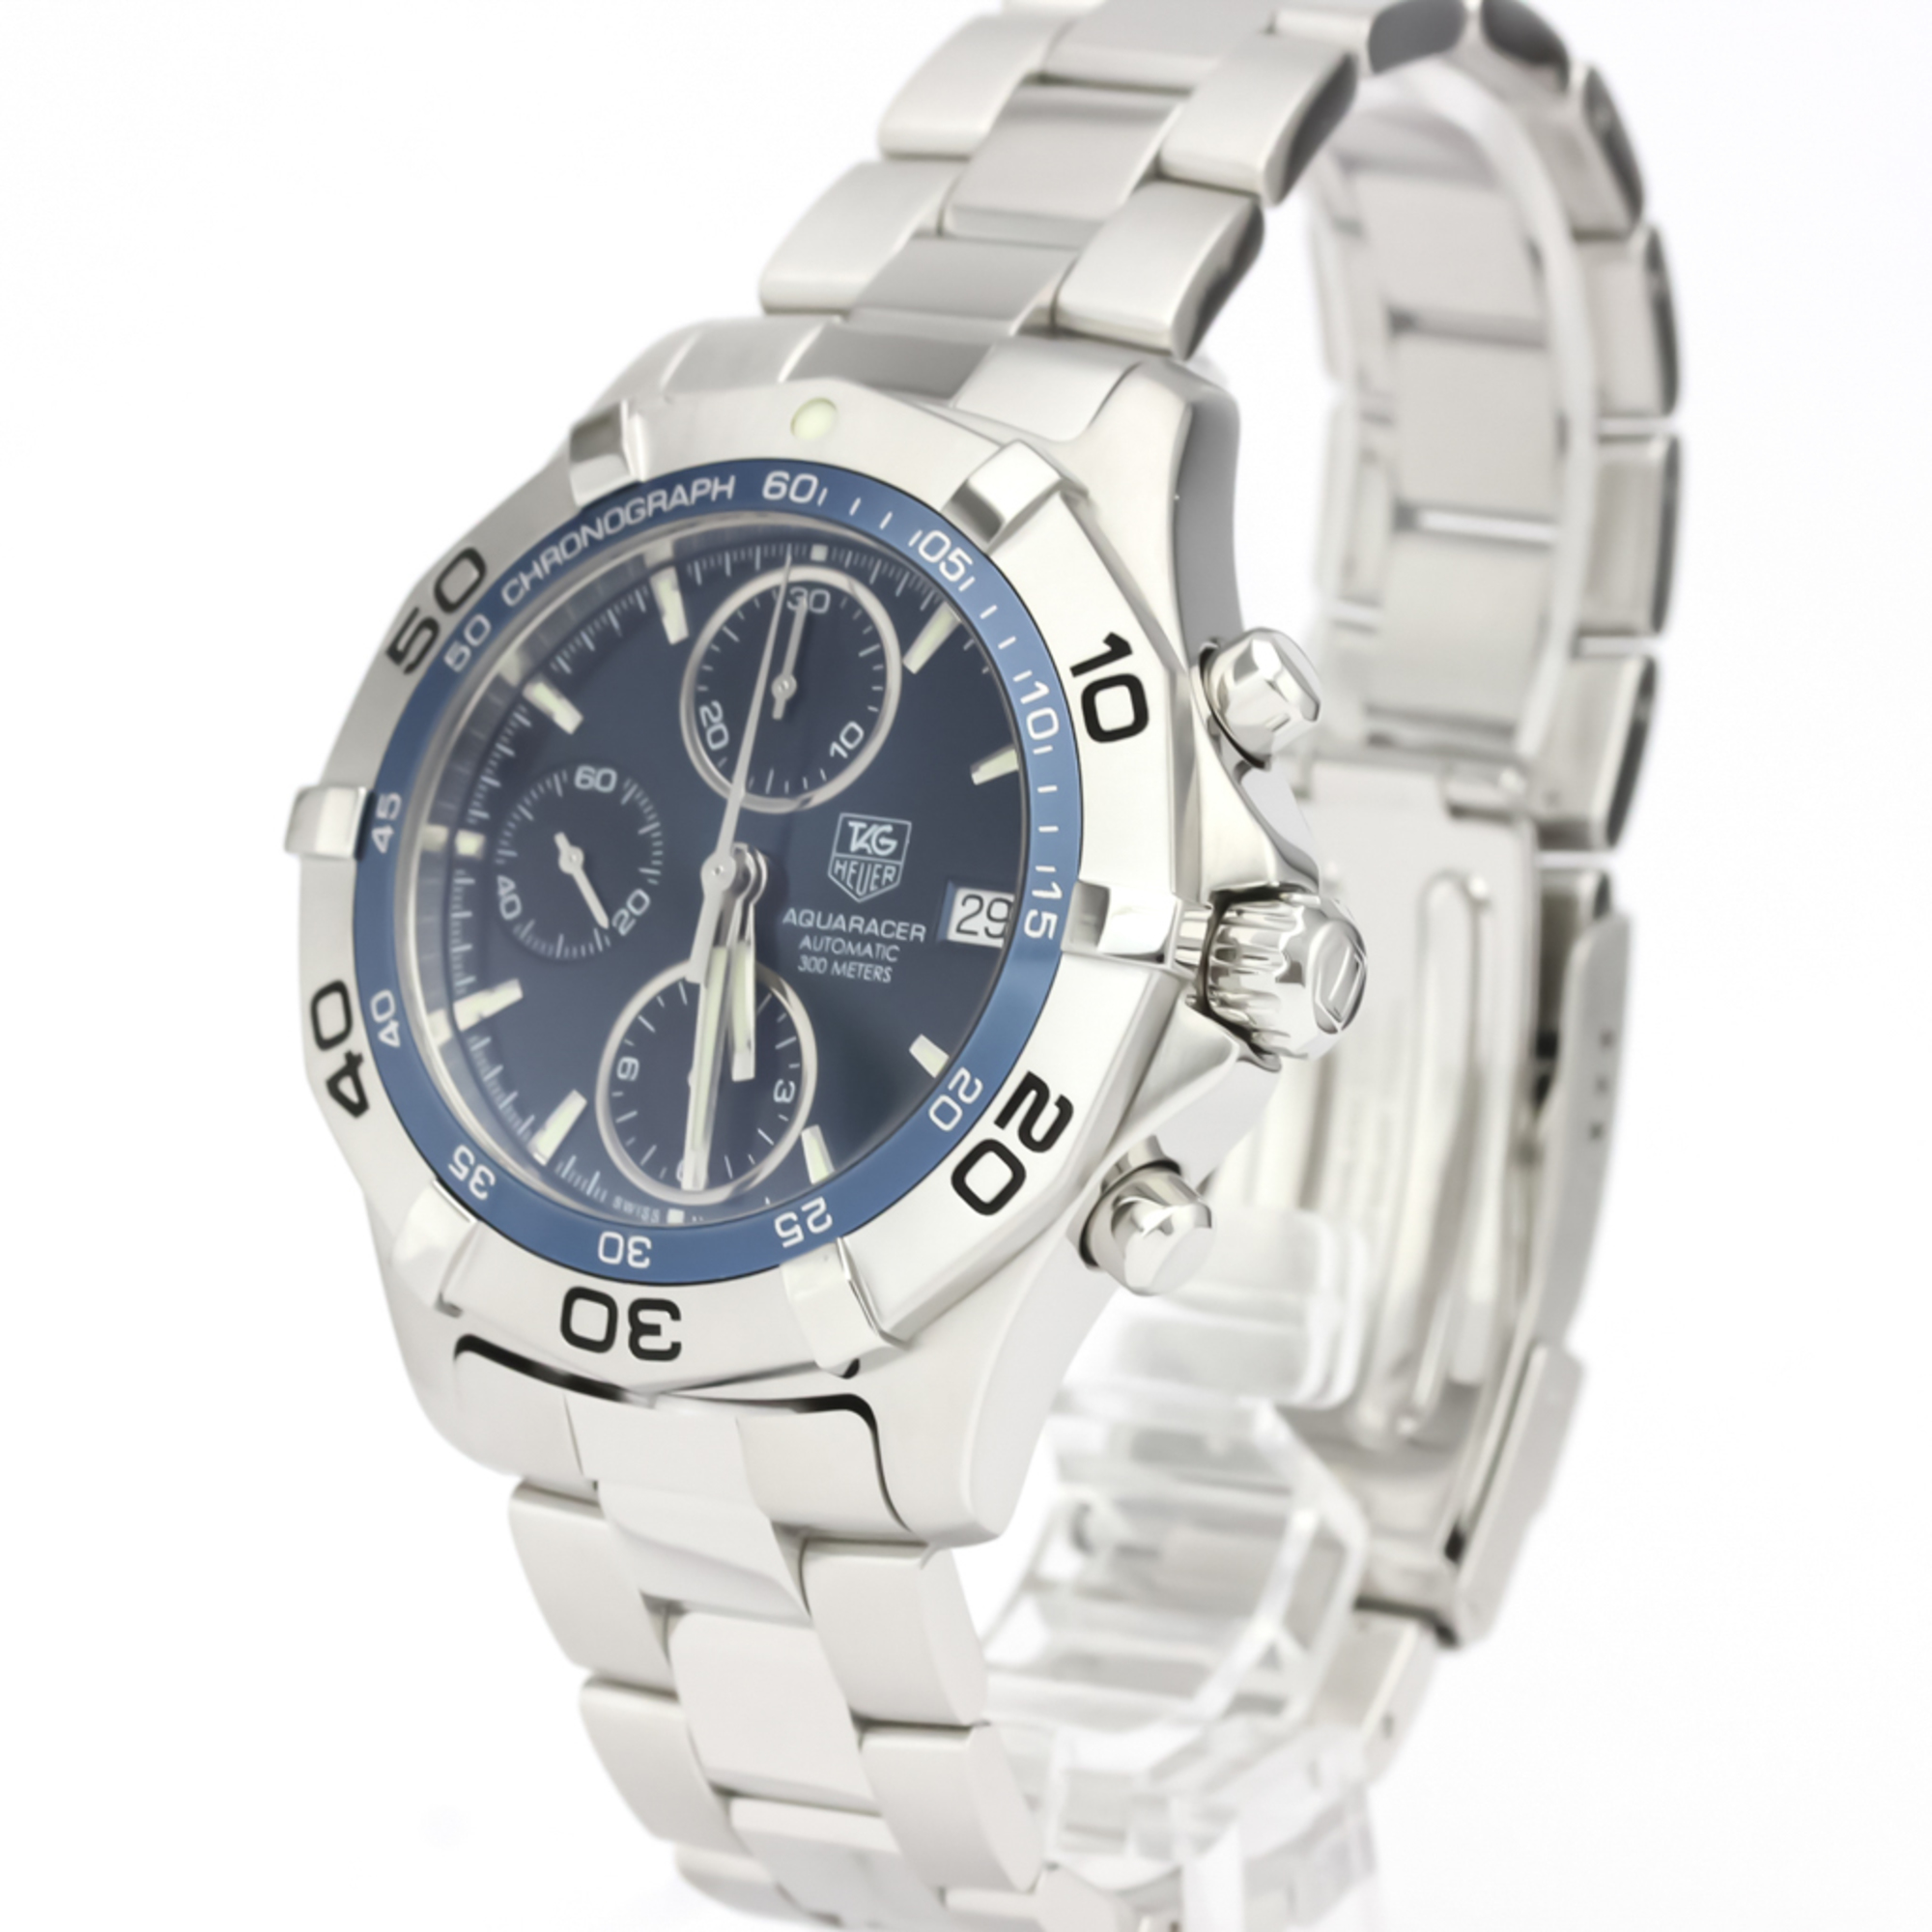 TAG HEUER Aquaracer Chronograph Steel Automatic Watch CAF2112